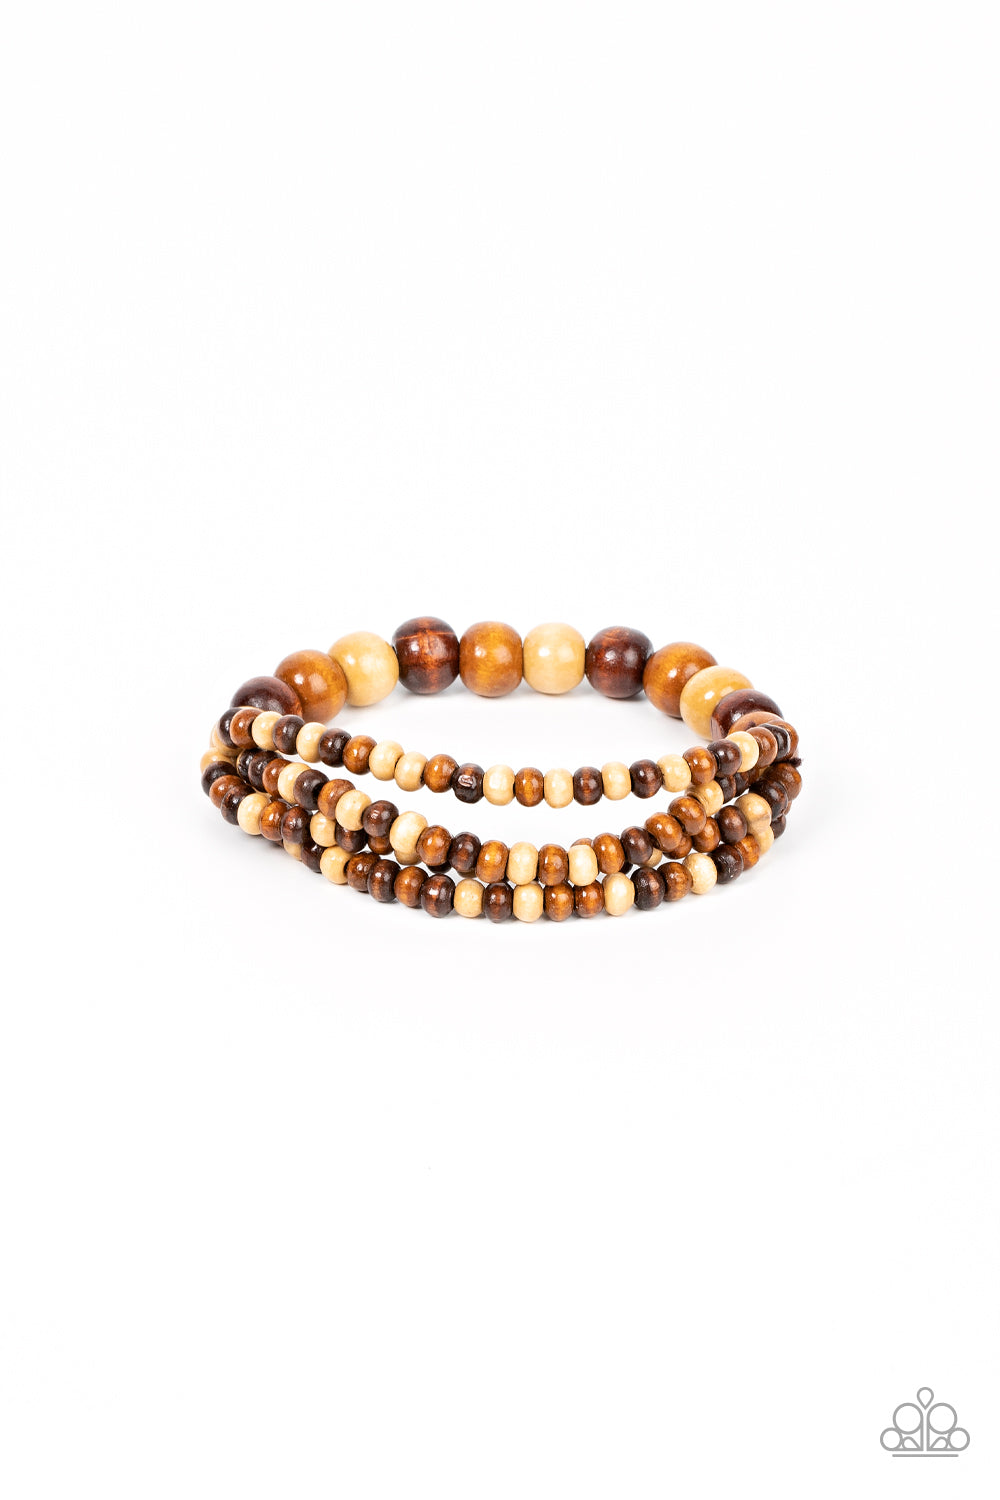 Paparazzi Oceania Oasis - Brown Wood Bracelets varying in natural wooden finishes, stretchy strands of dainty wooden beads attach to a single row of oversized wooden beads around the wrist for an earthy spin on the homespun trend.  Sold as one individual bracelet.